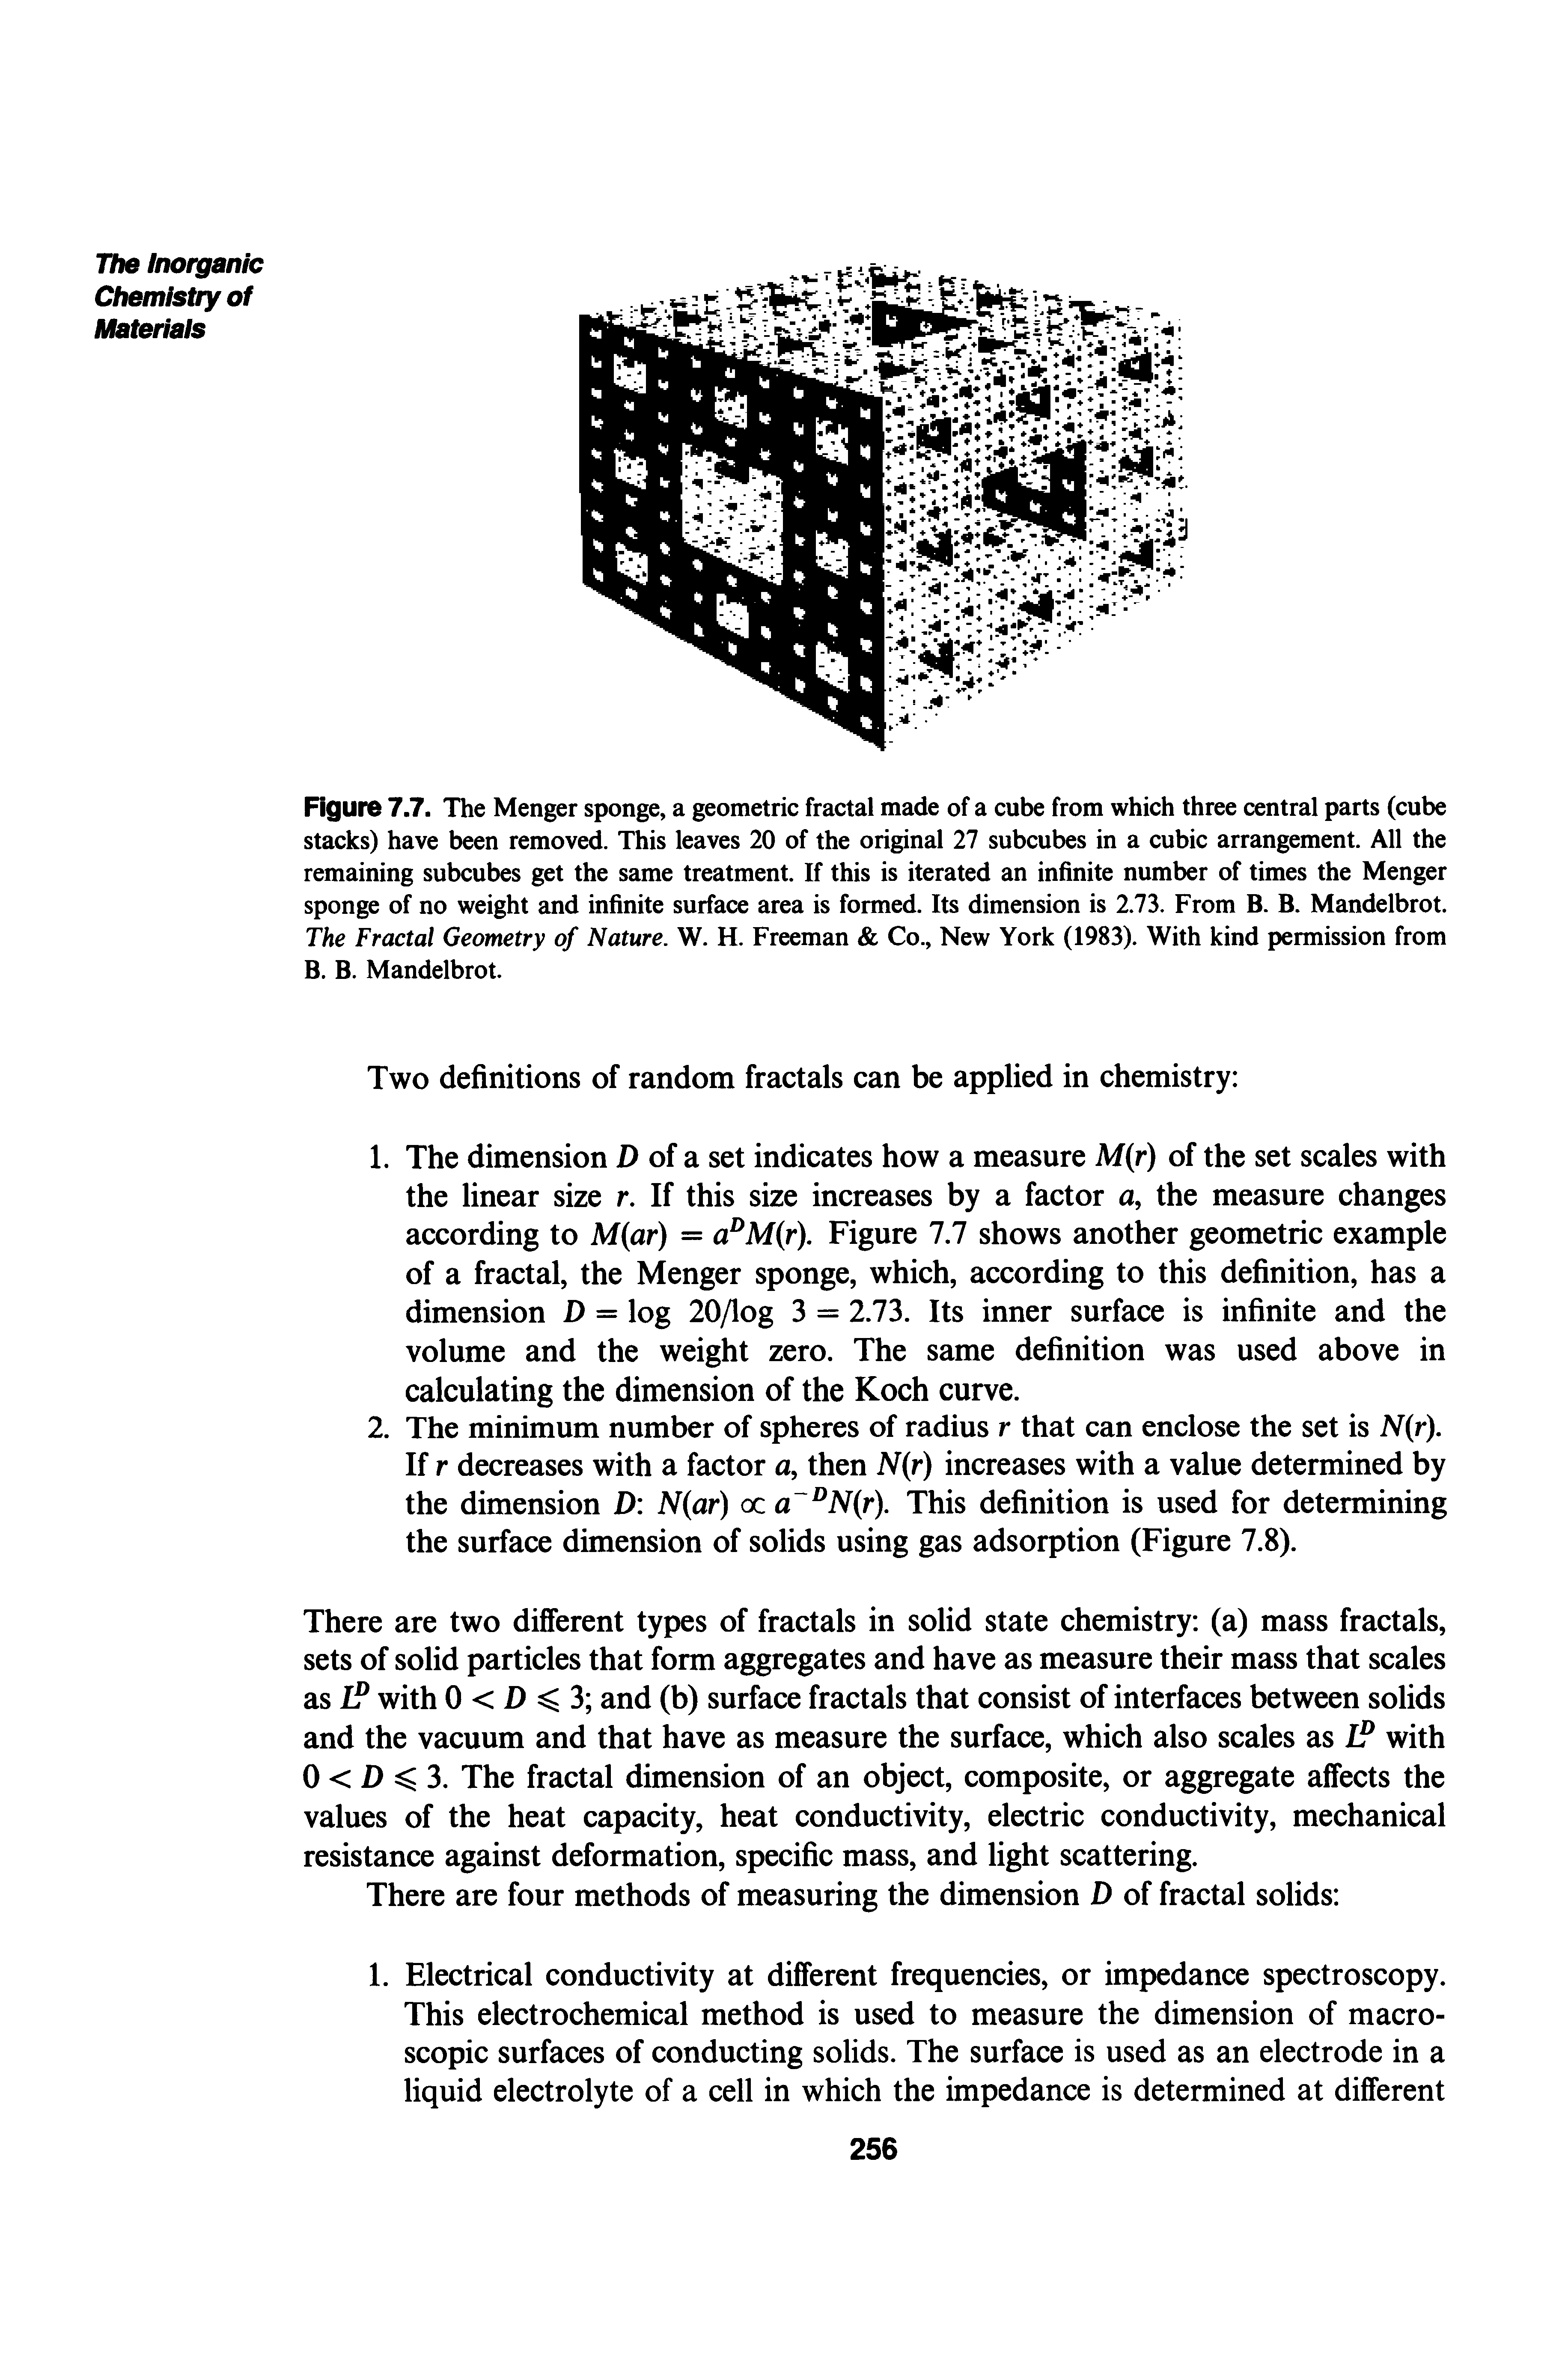 Figure 7.7. The Menger sponge, a geometric fractal made of a cube from which three central parts (cube stacks) have been removed. This leaves 20 of the original 27 subcubes in a cubic arrangement. All the remaining subcubes get the same treatment. If this is iterated an infinite number of times the Menger sponge of no weight and infinite surface area is formed. Its dimension is 2.73. From B. B. Mandelbrot. The Fractal Geometry of Nature. W. H. Freeman Co., New York (1983). With kind permission from B. B. Mandelbrot.